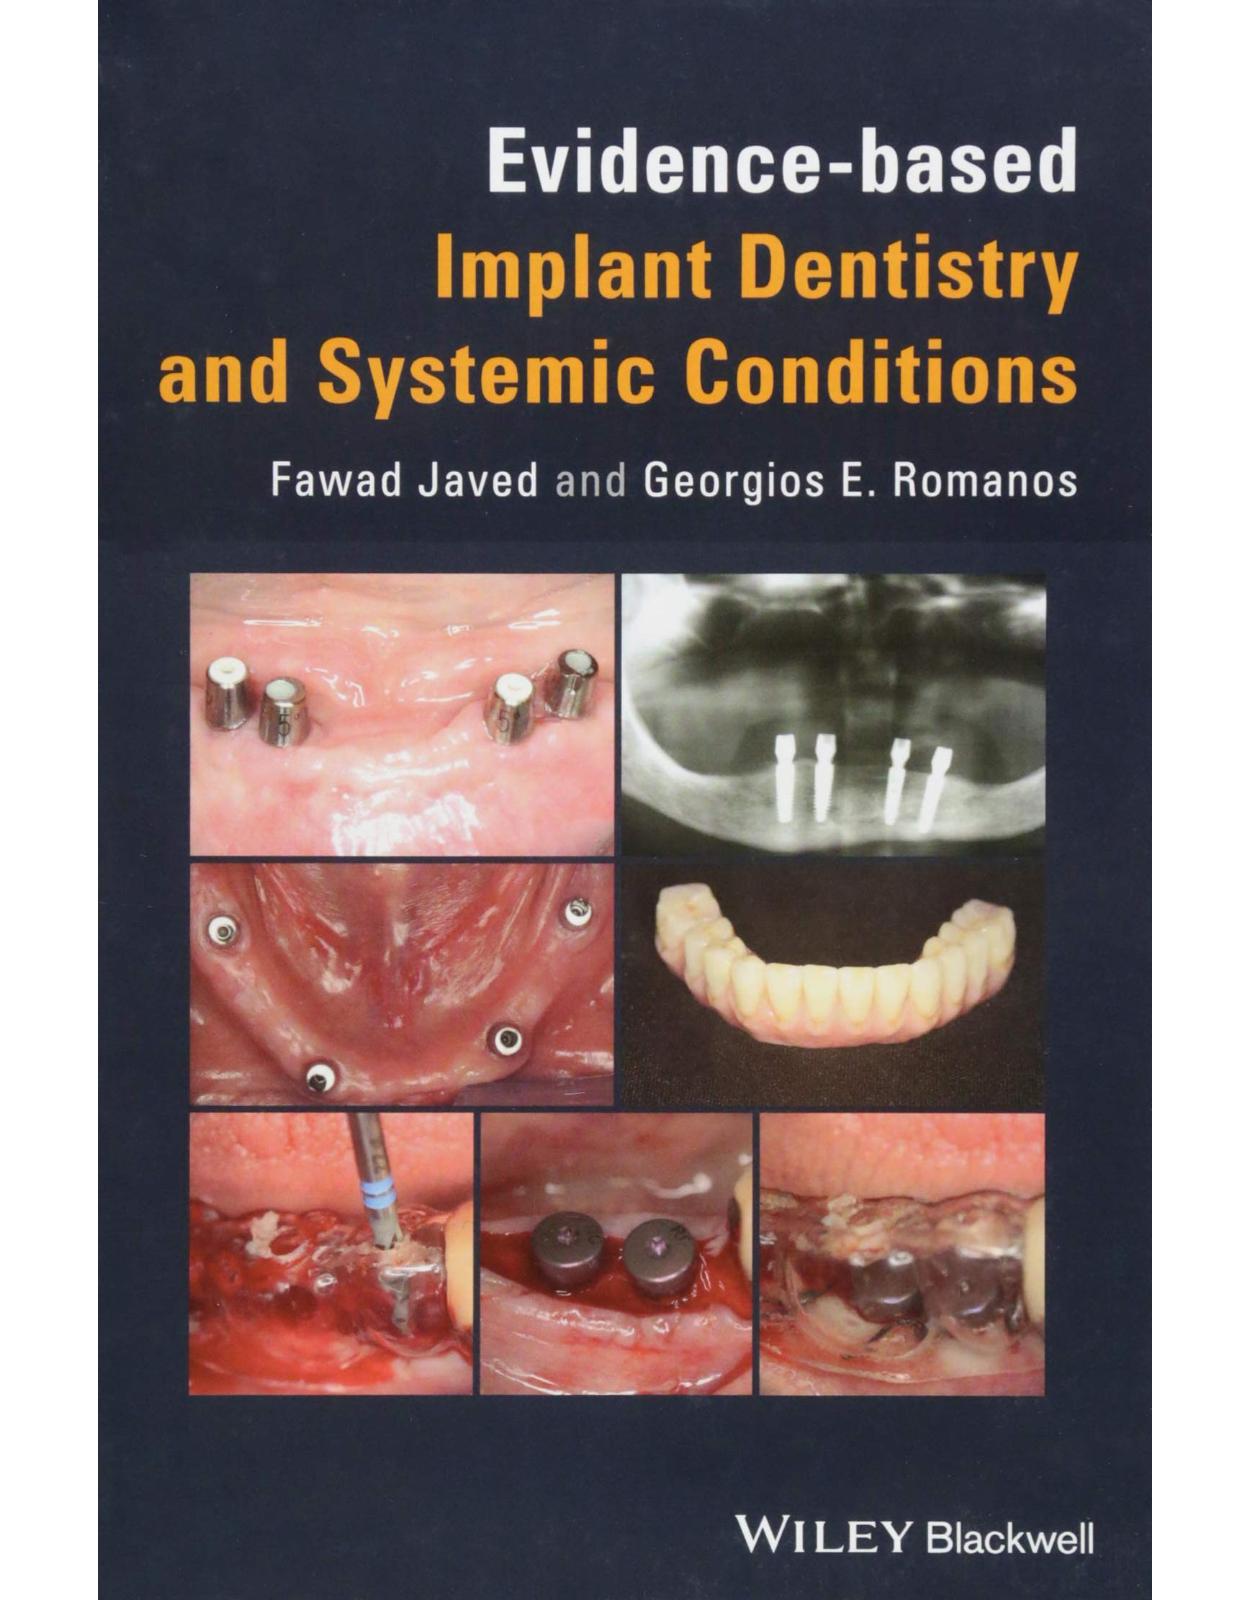 Evidencebased Implant Dentistry and Systemic Conditions